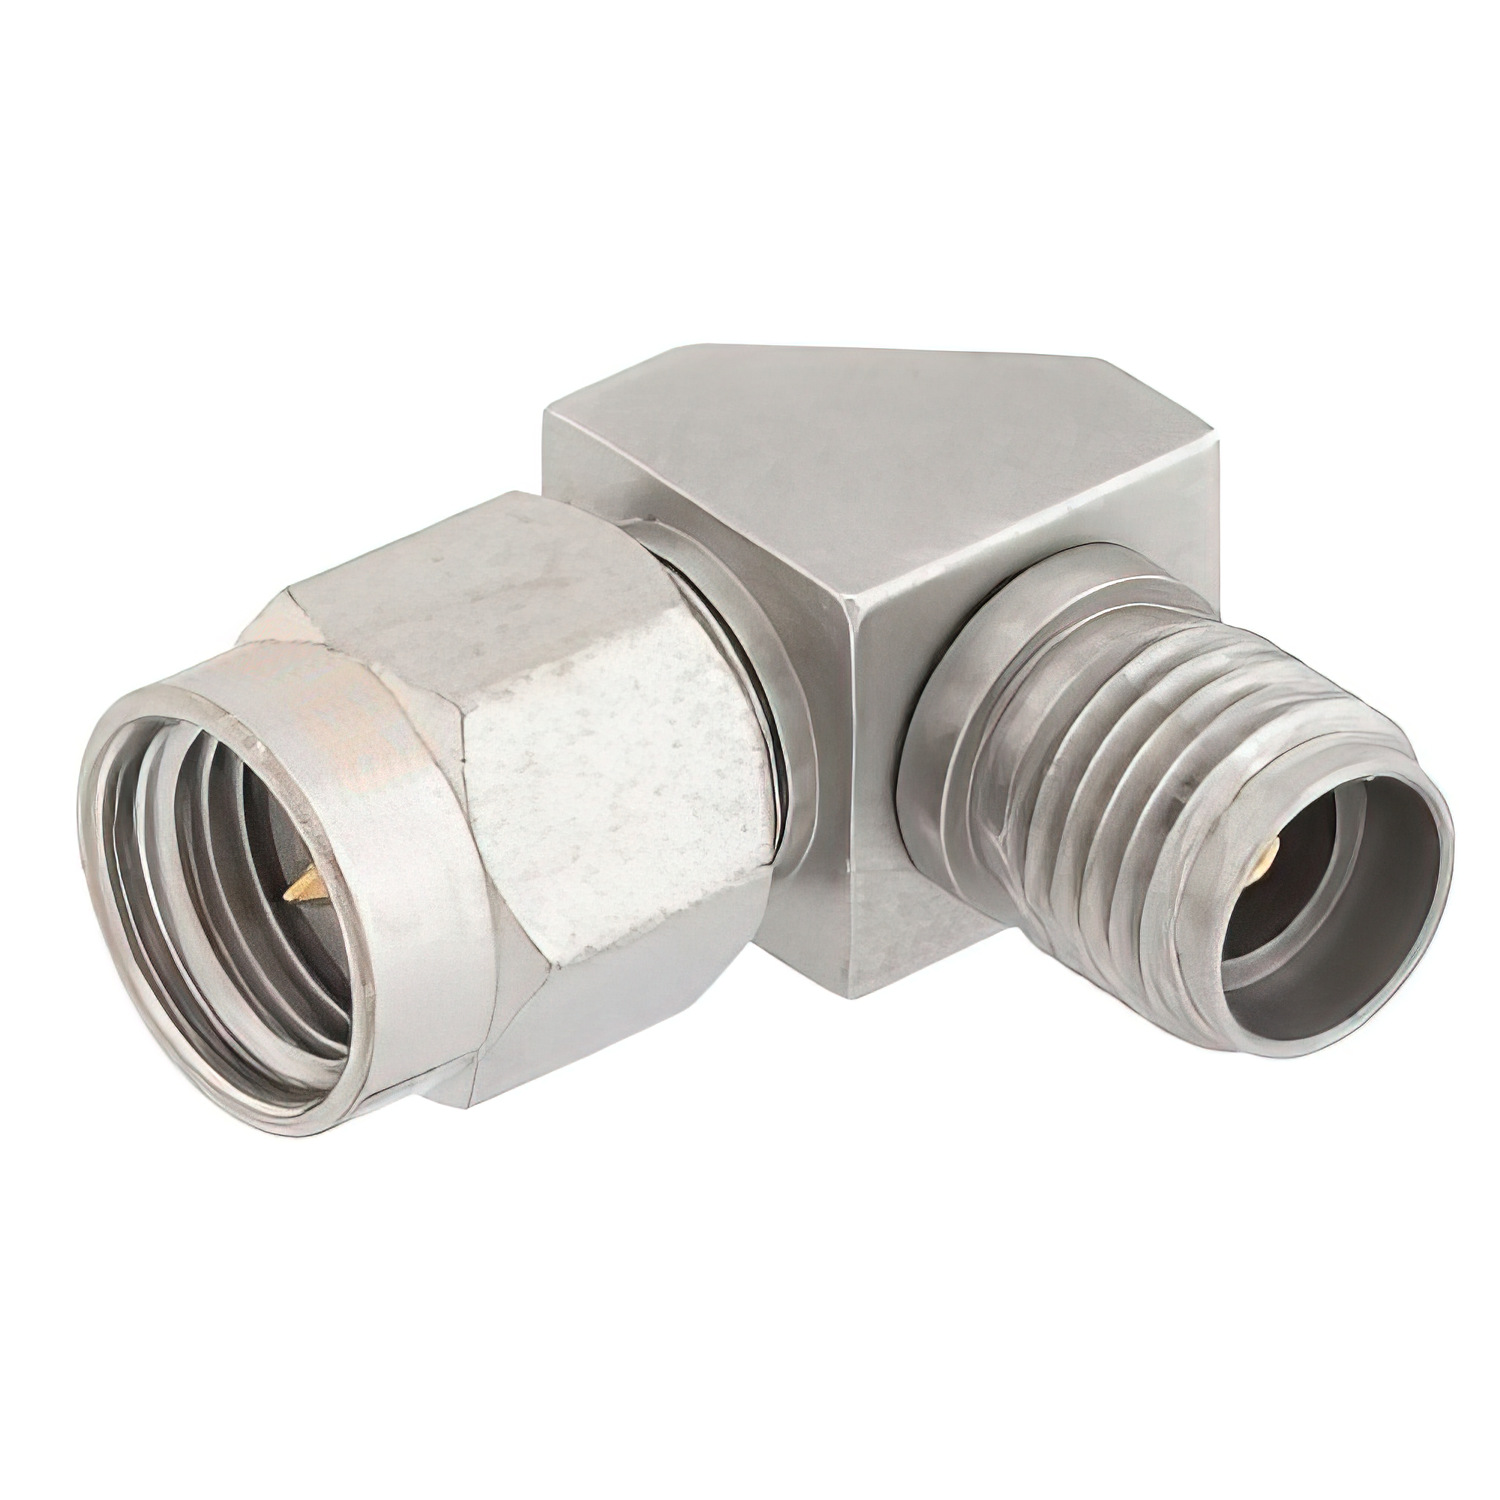 2.92mm Male to 3.5mm Female Right Angle Adapter1